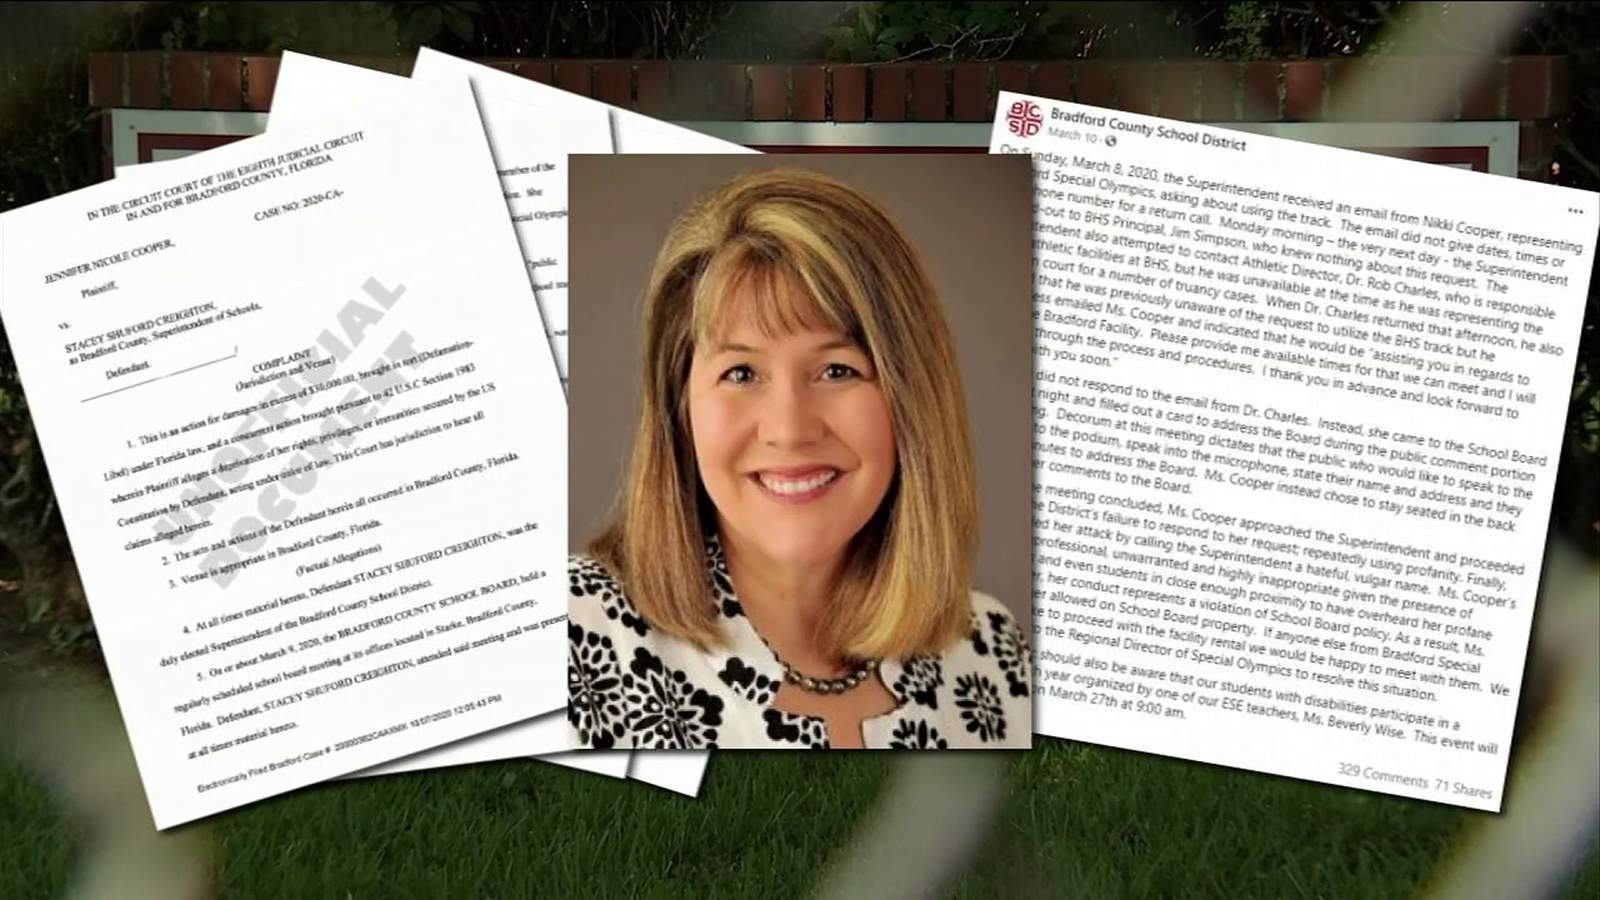 Bradford superintendent sued after conflict with Special Olympics organizer